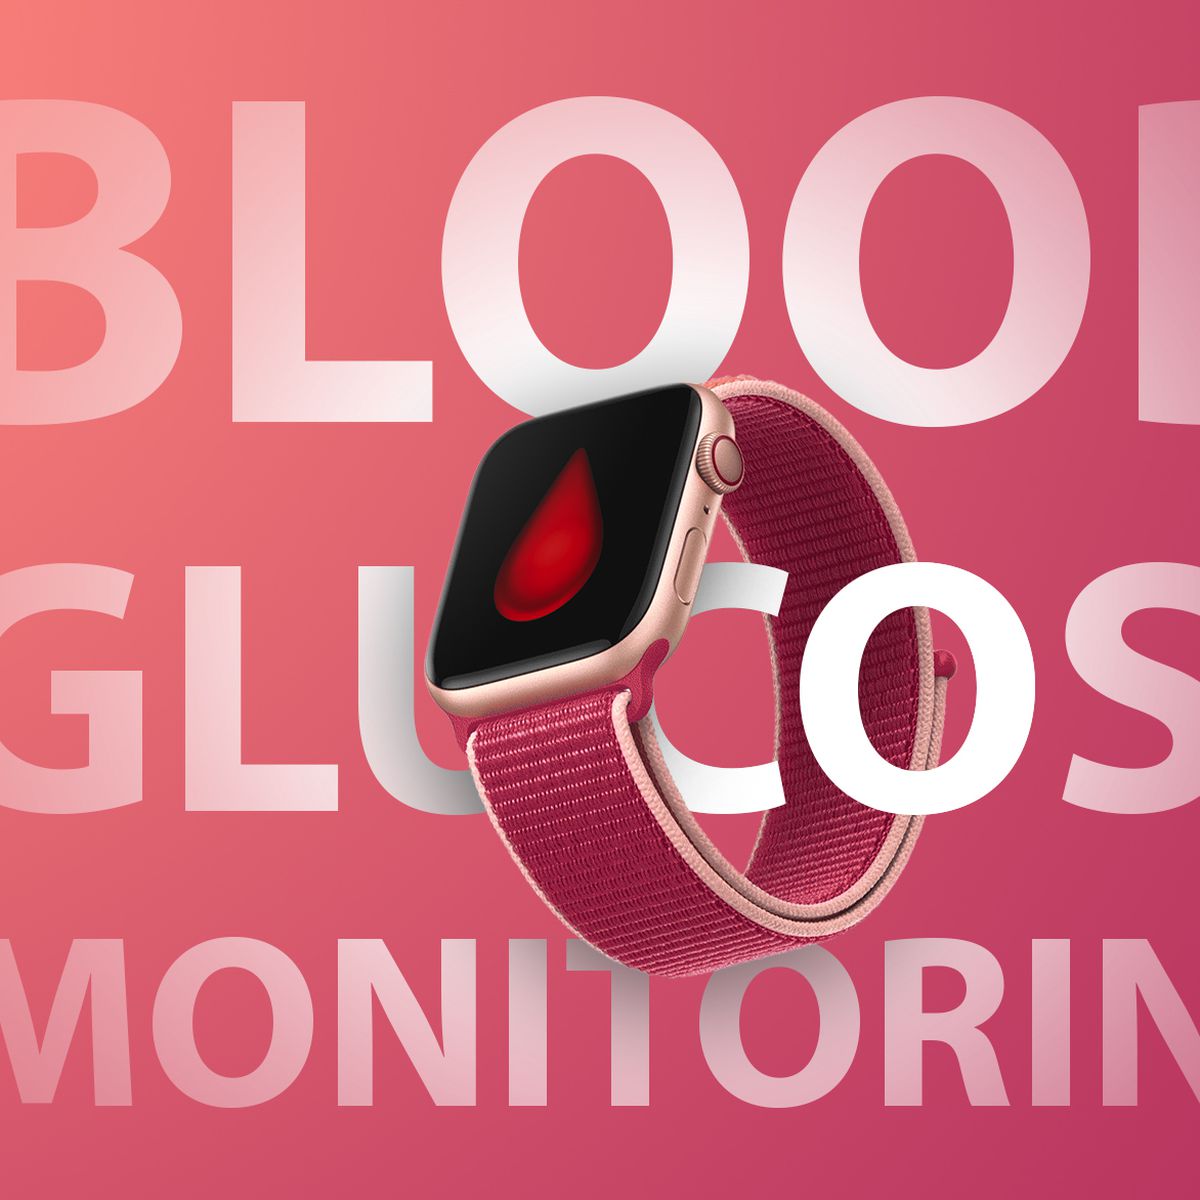 Apple Watch may track blood sugar levels, other health features